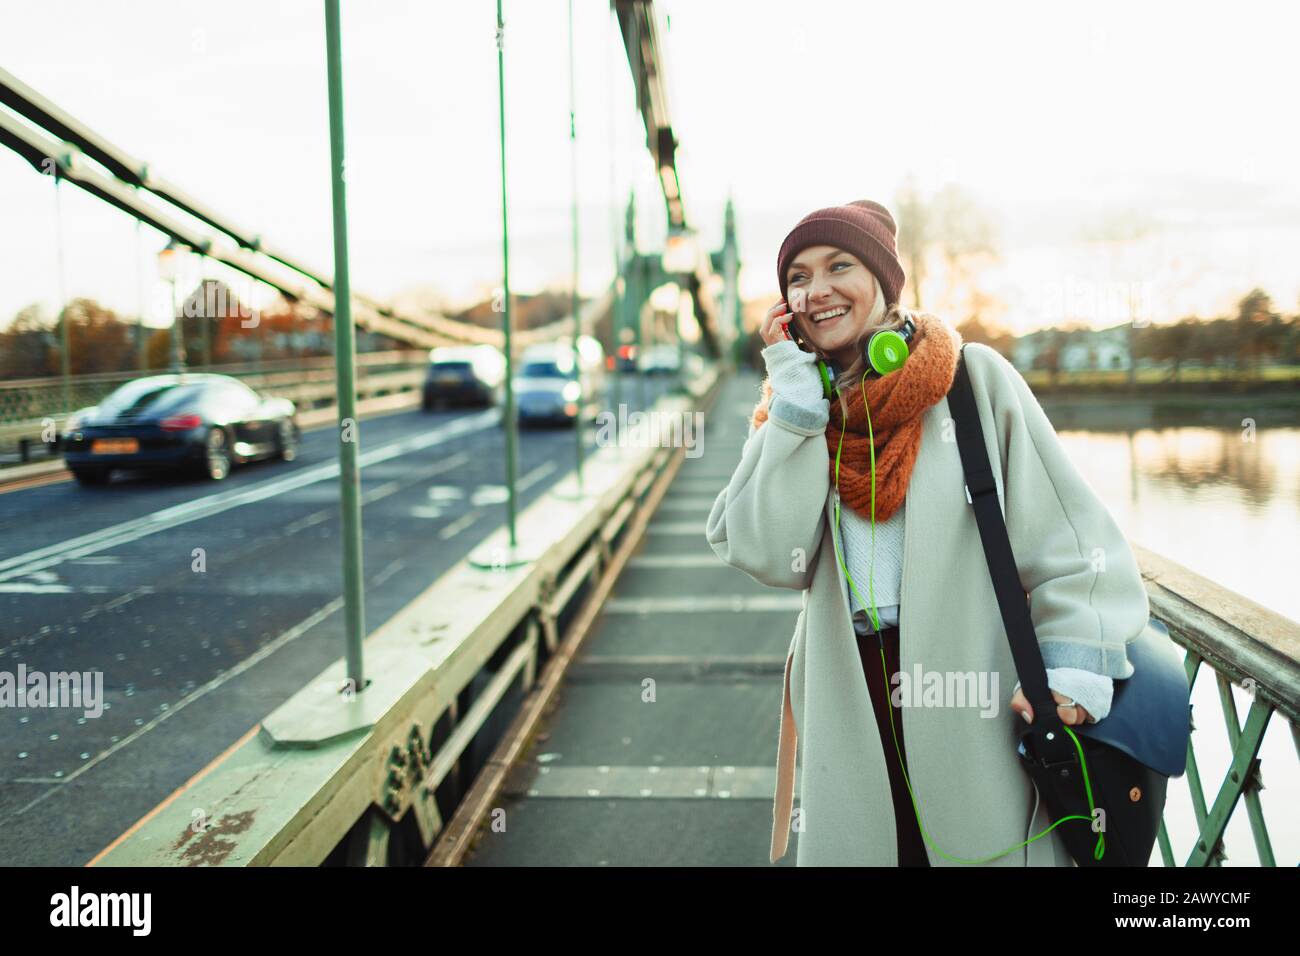 Young woman in stocking cap and scarf talking on smart phone on bridge Stock Photo